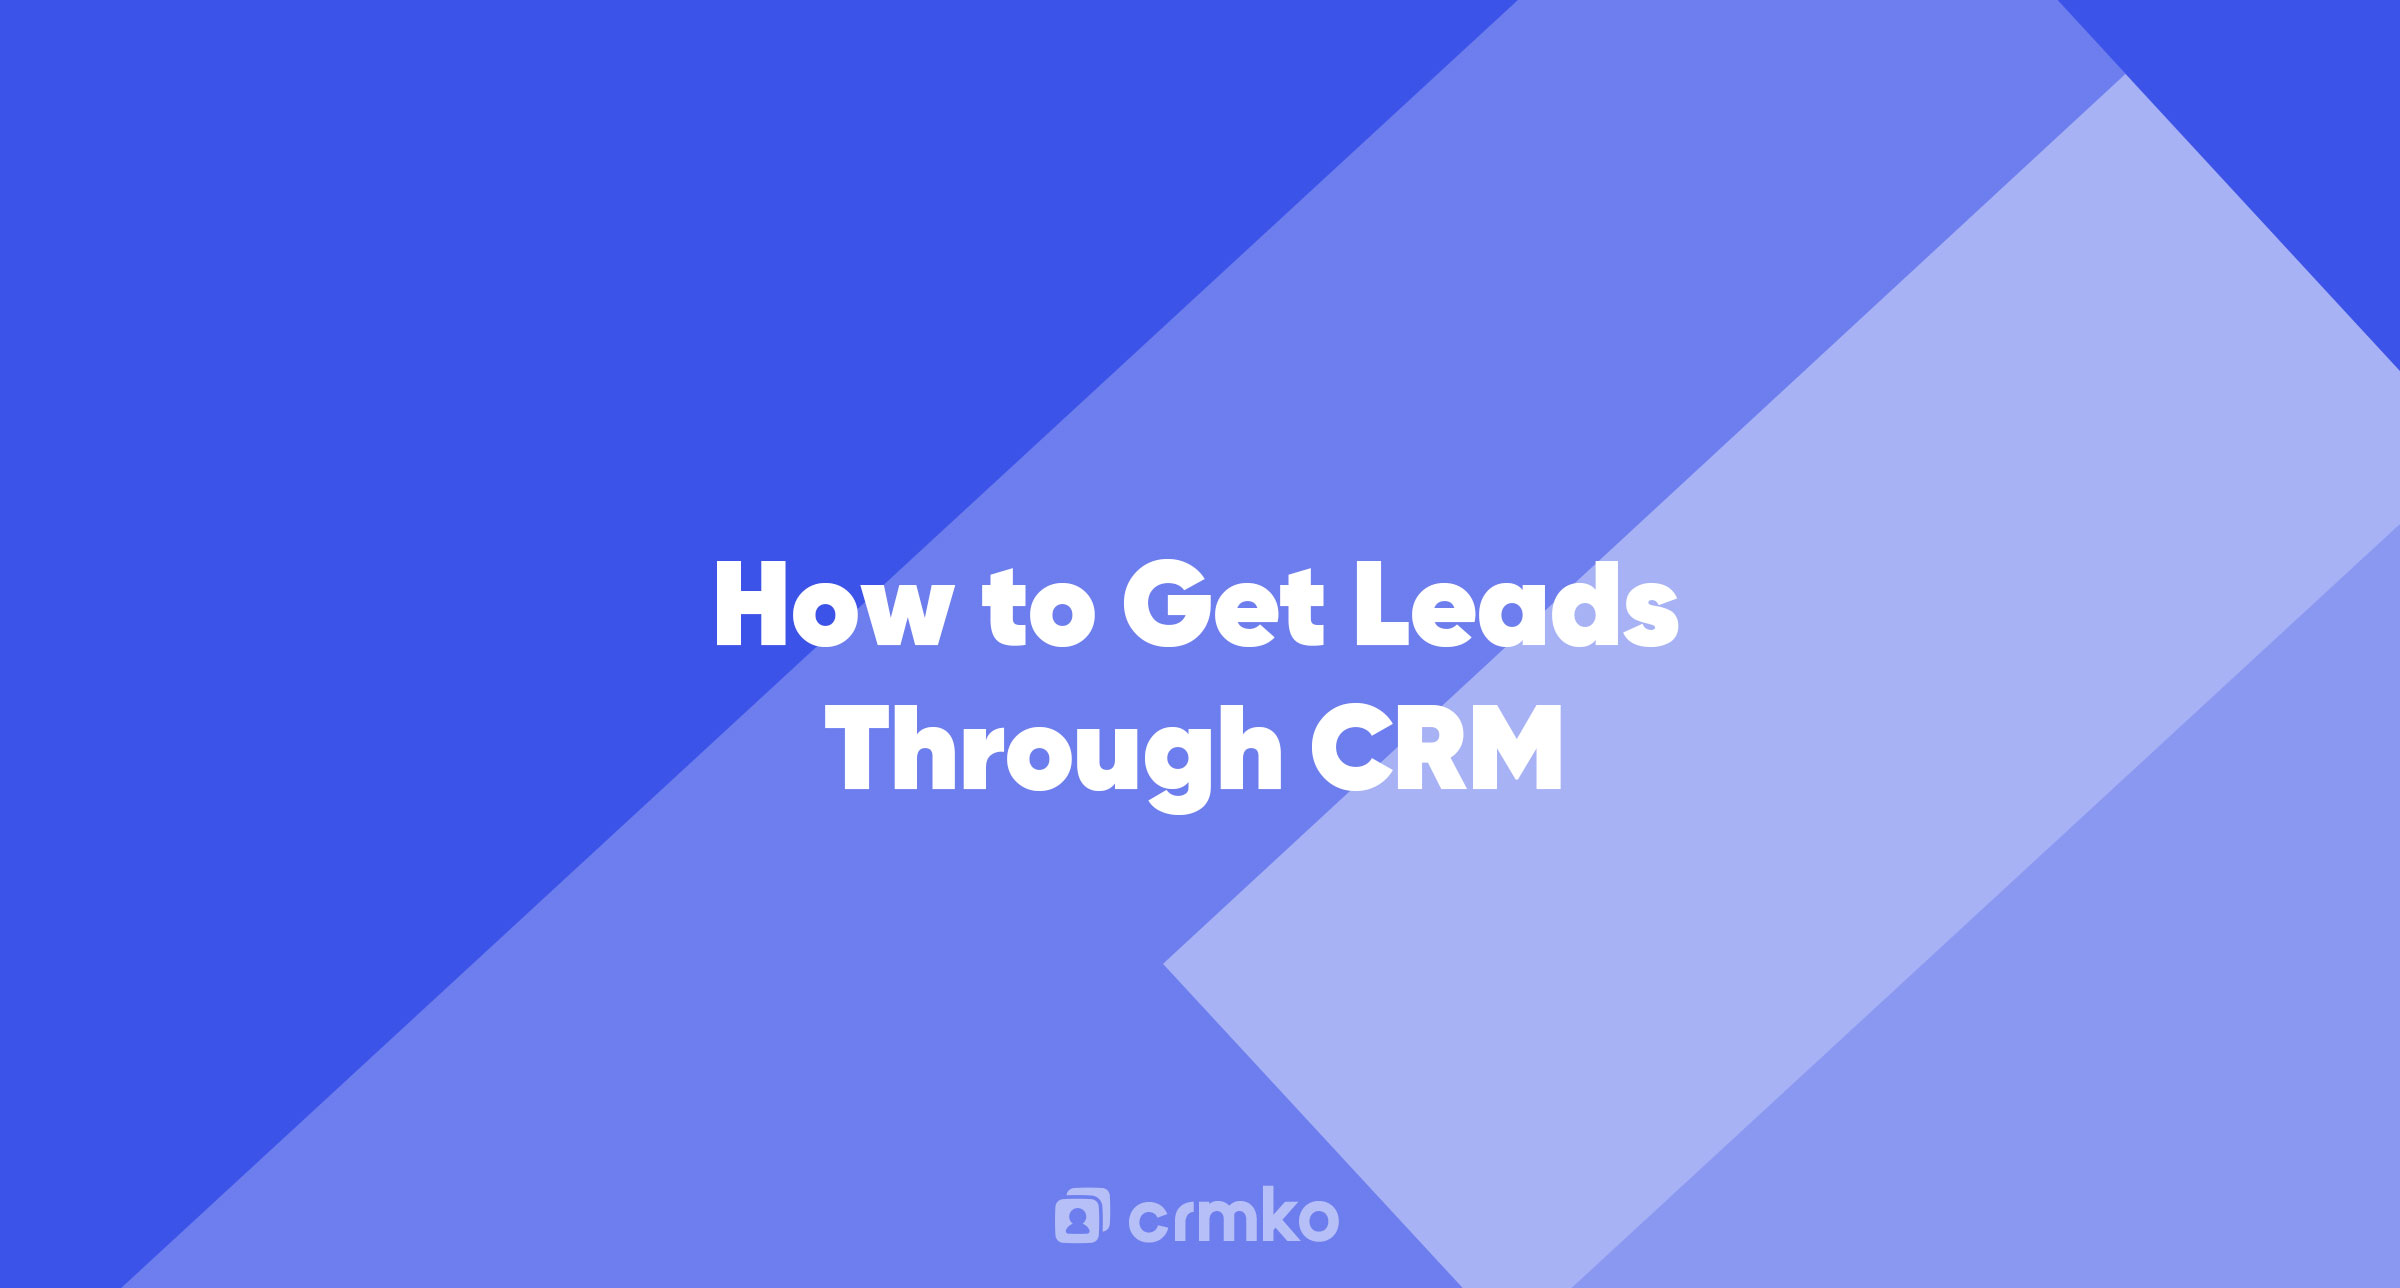 Article | How to Get Leads Through CRM